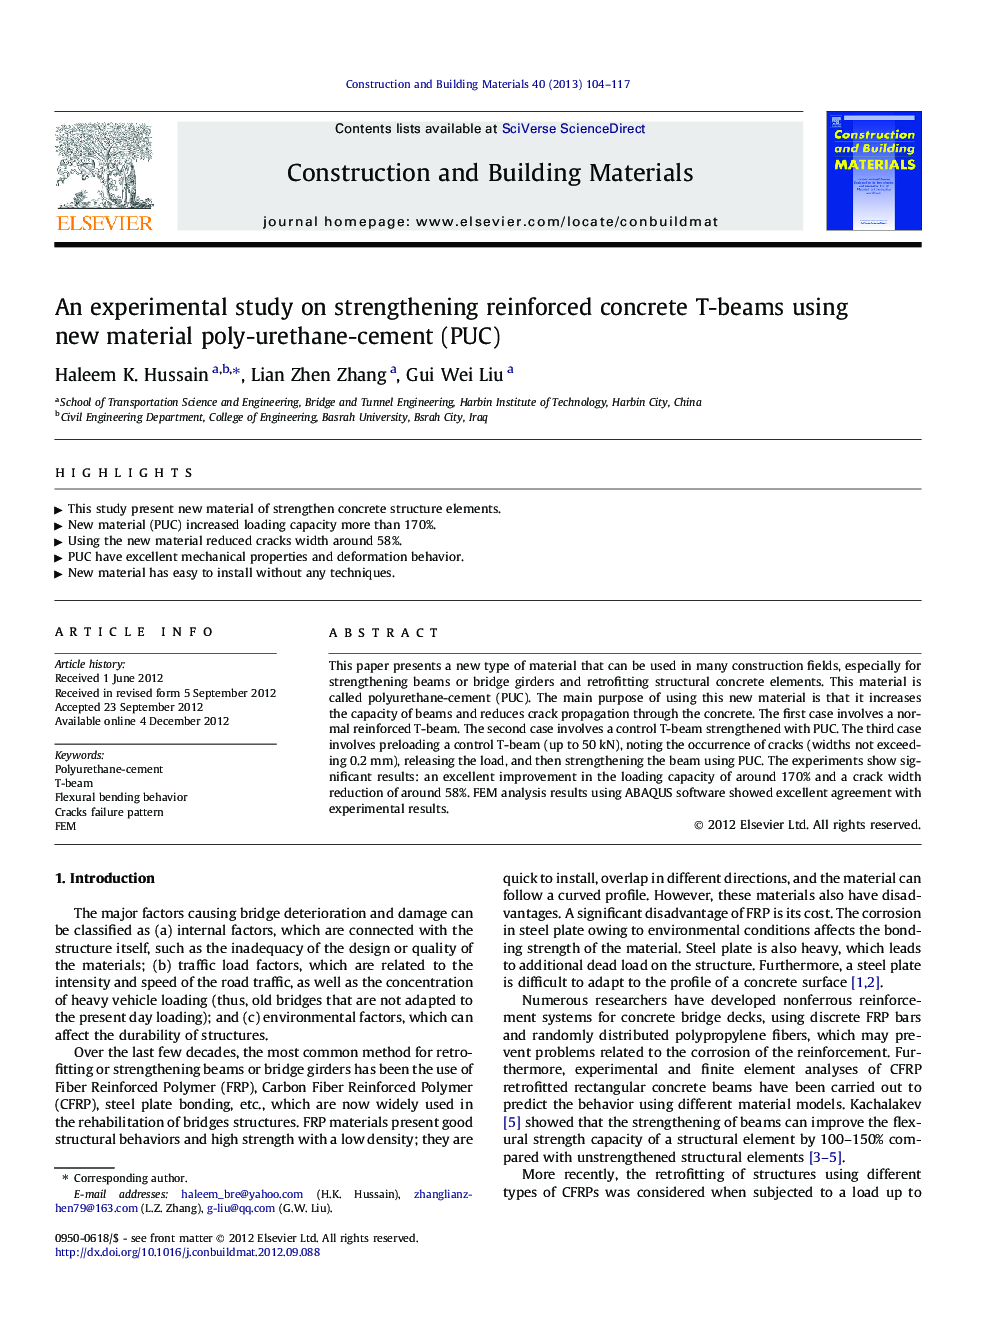 An experimental study on strengthening reinforced concrete T-beams using new material poly-urethane-cement (PUC)